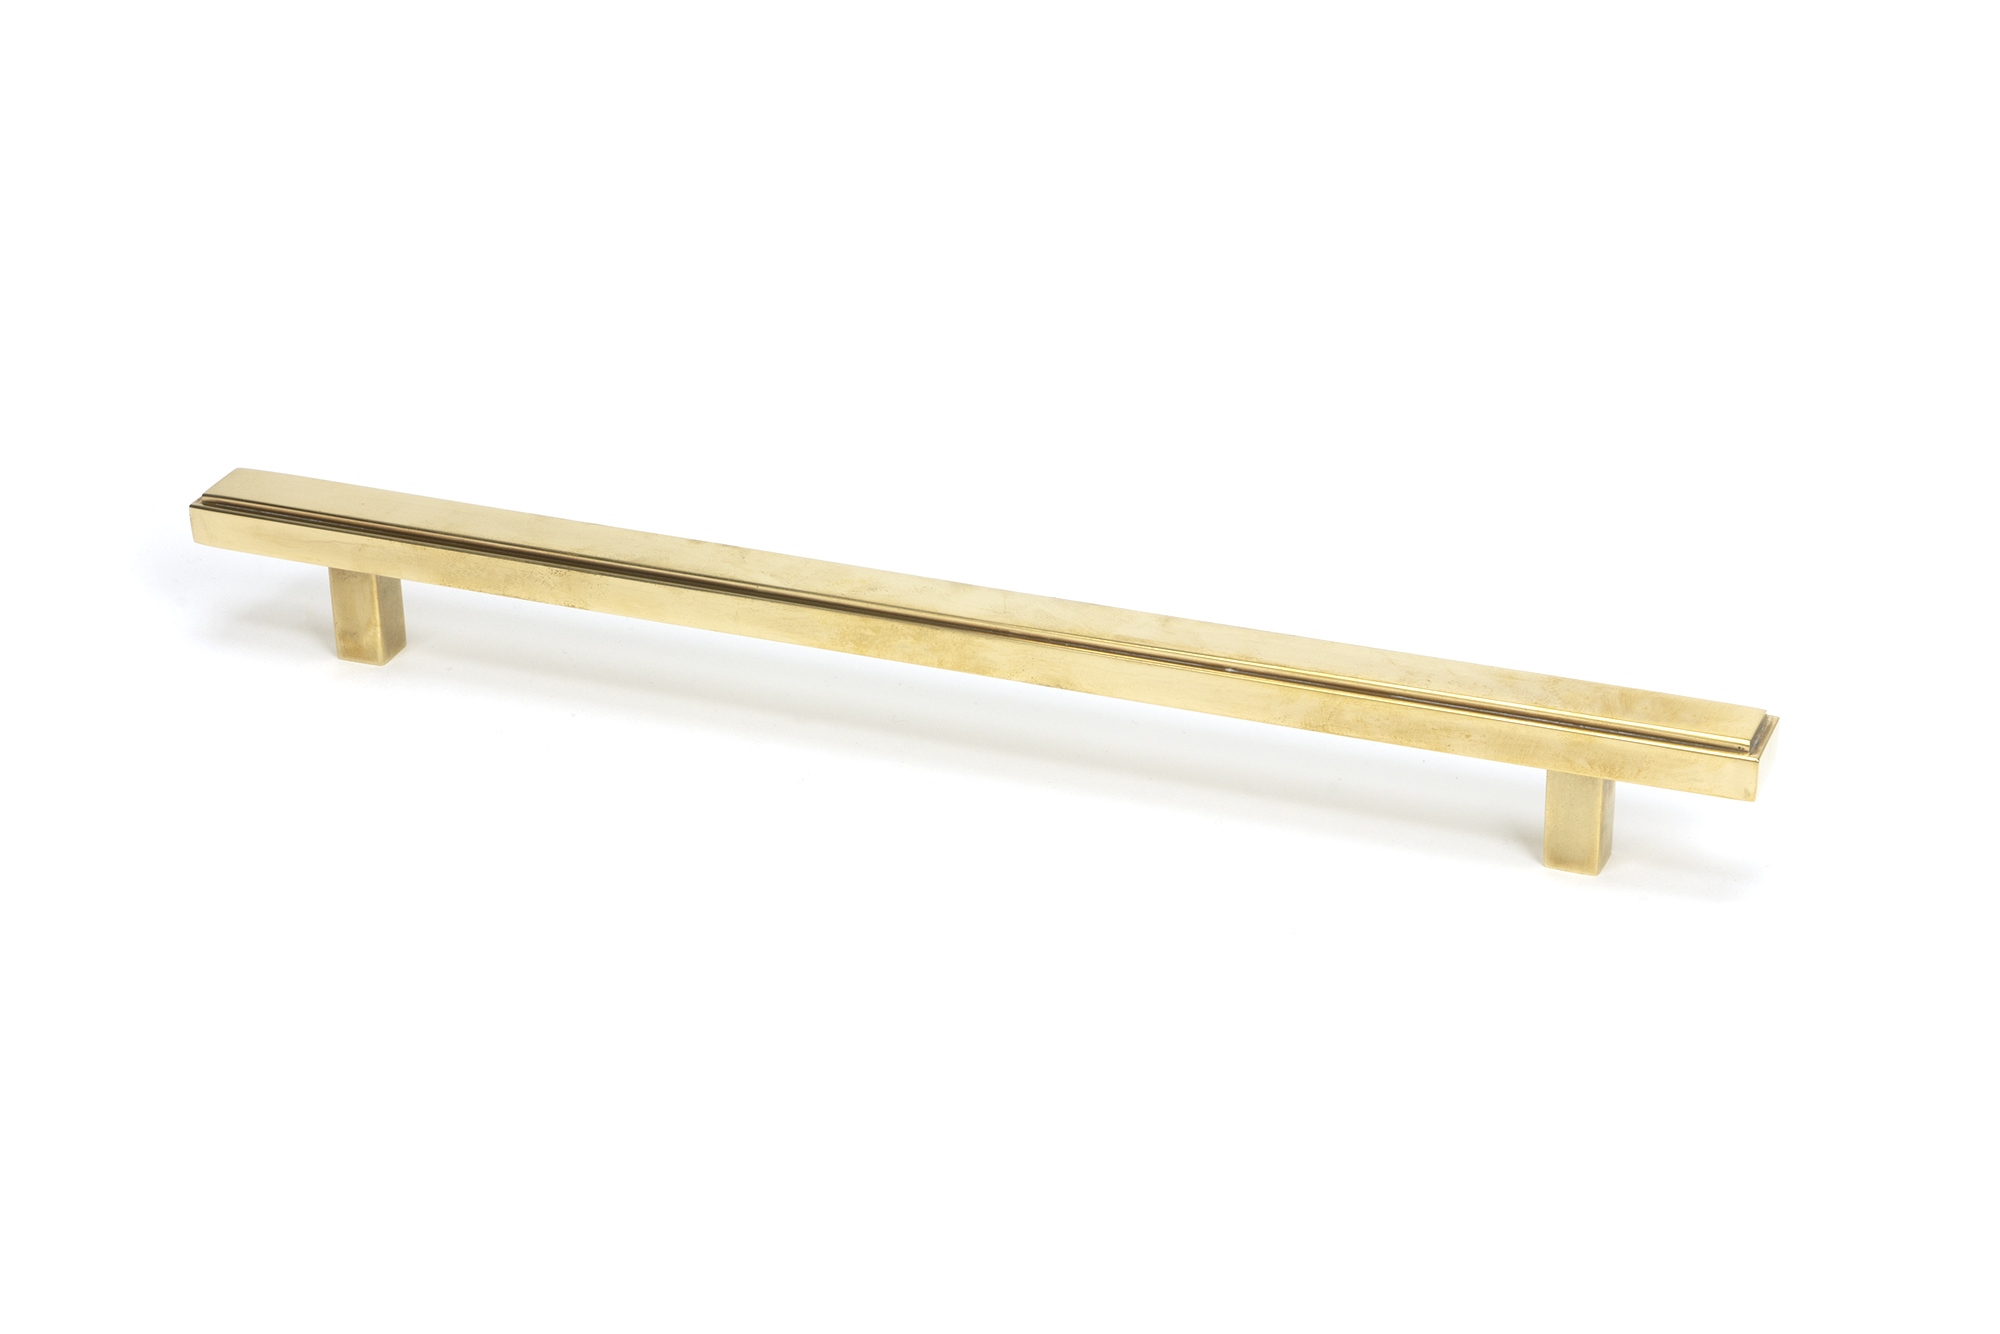 Aged Brass Scully Pull Handle - Large